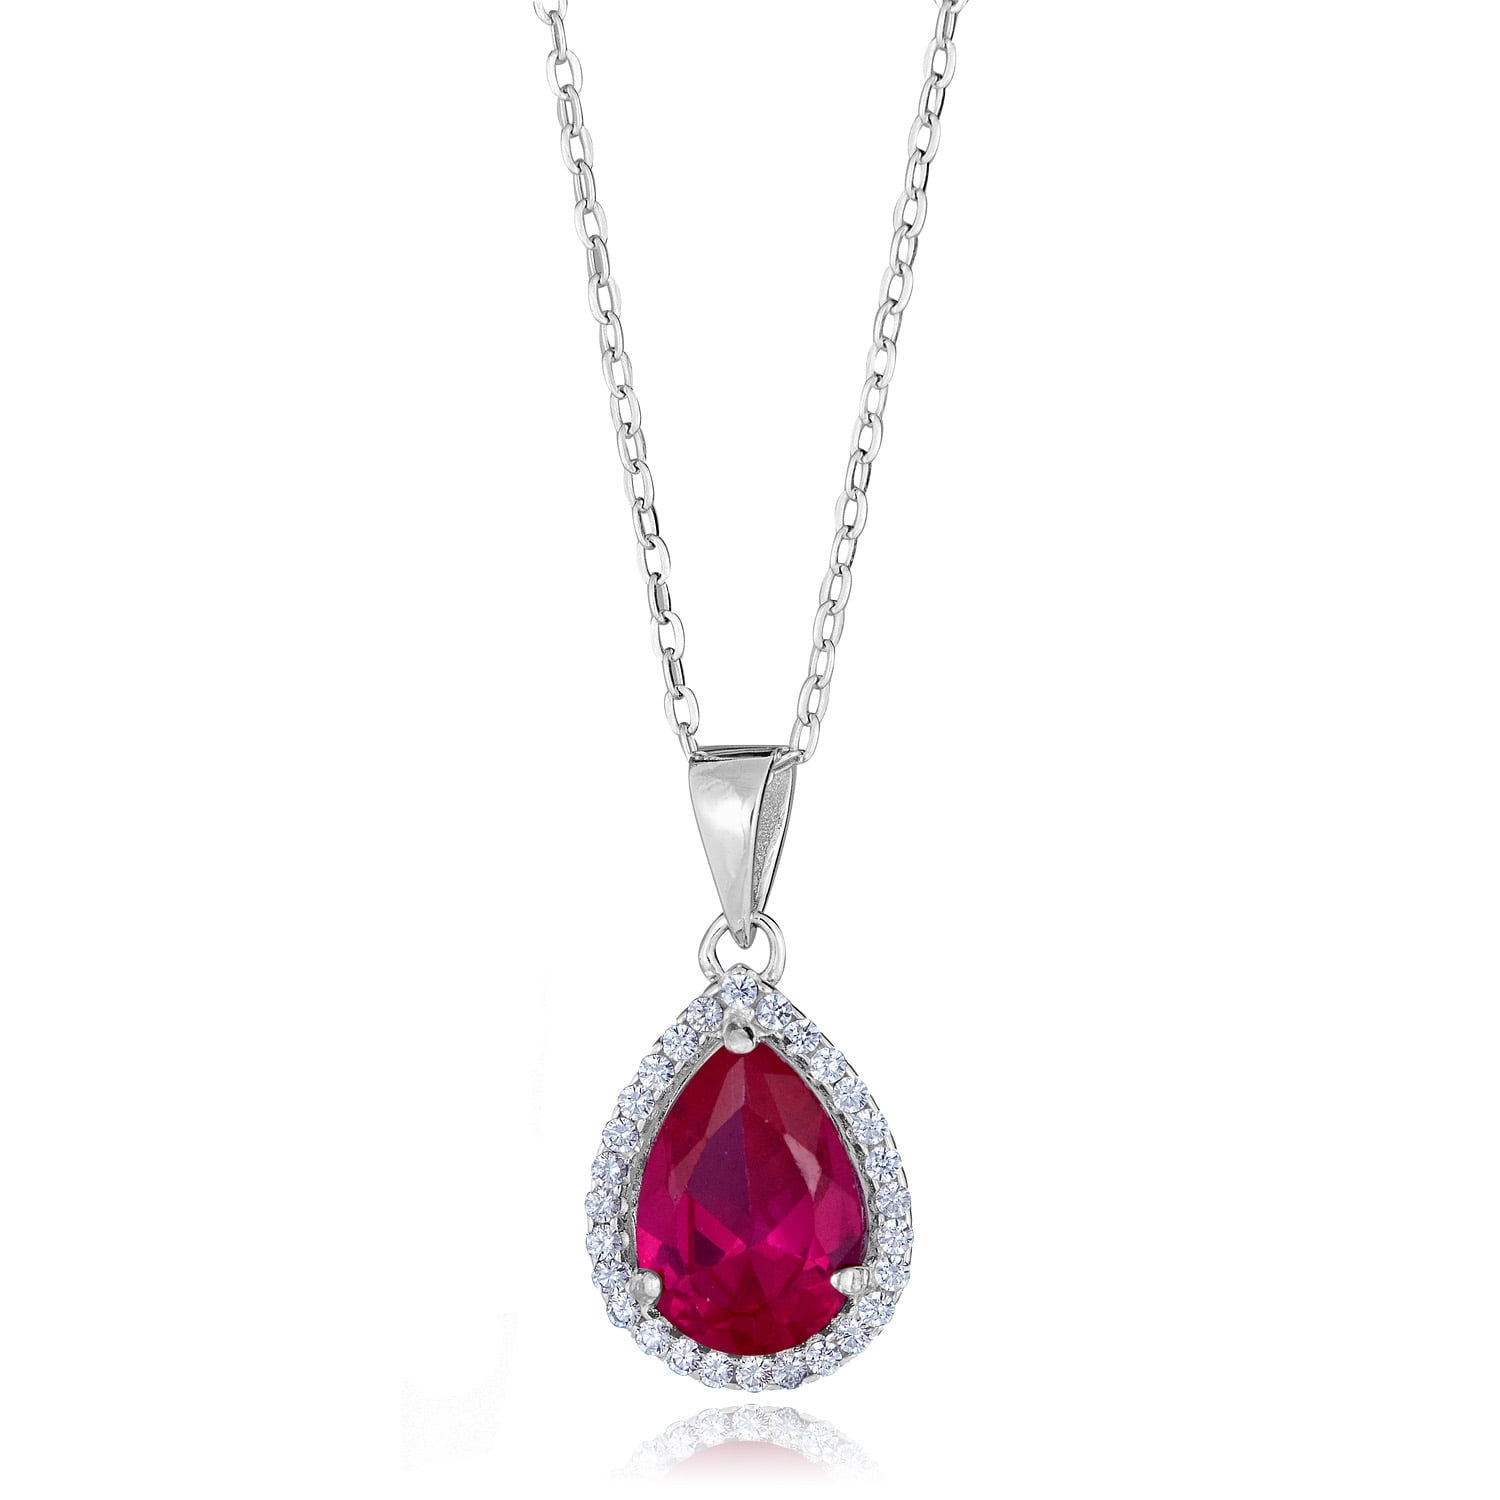 Pear Cut Red Ruby Solitaire Pendant Red Gemstone Pendant 925 Sterling Silver Handmade Neckless